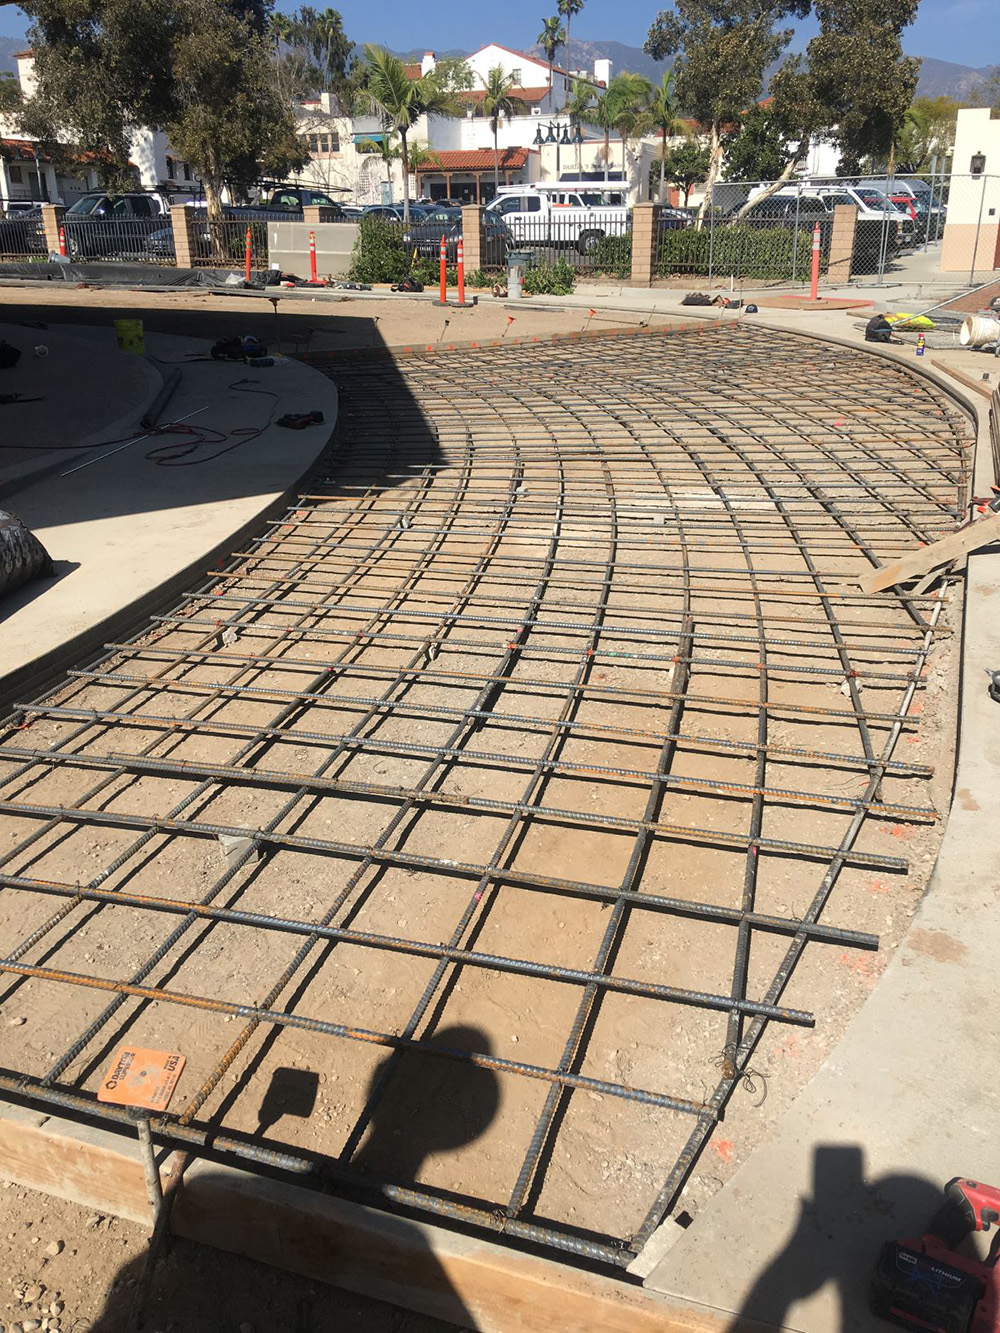 driveway center section reinforced with rebar